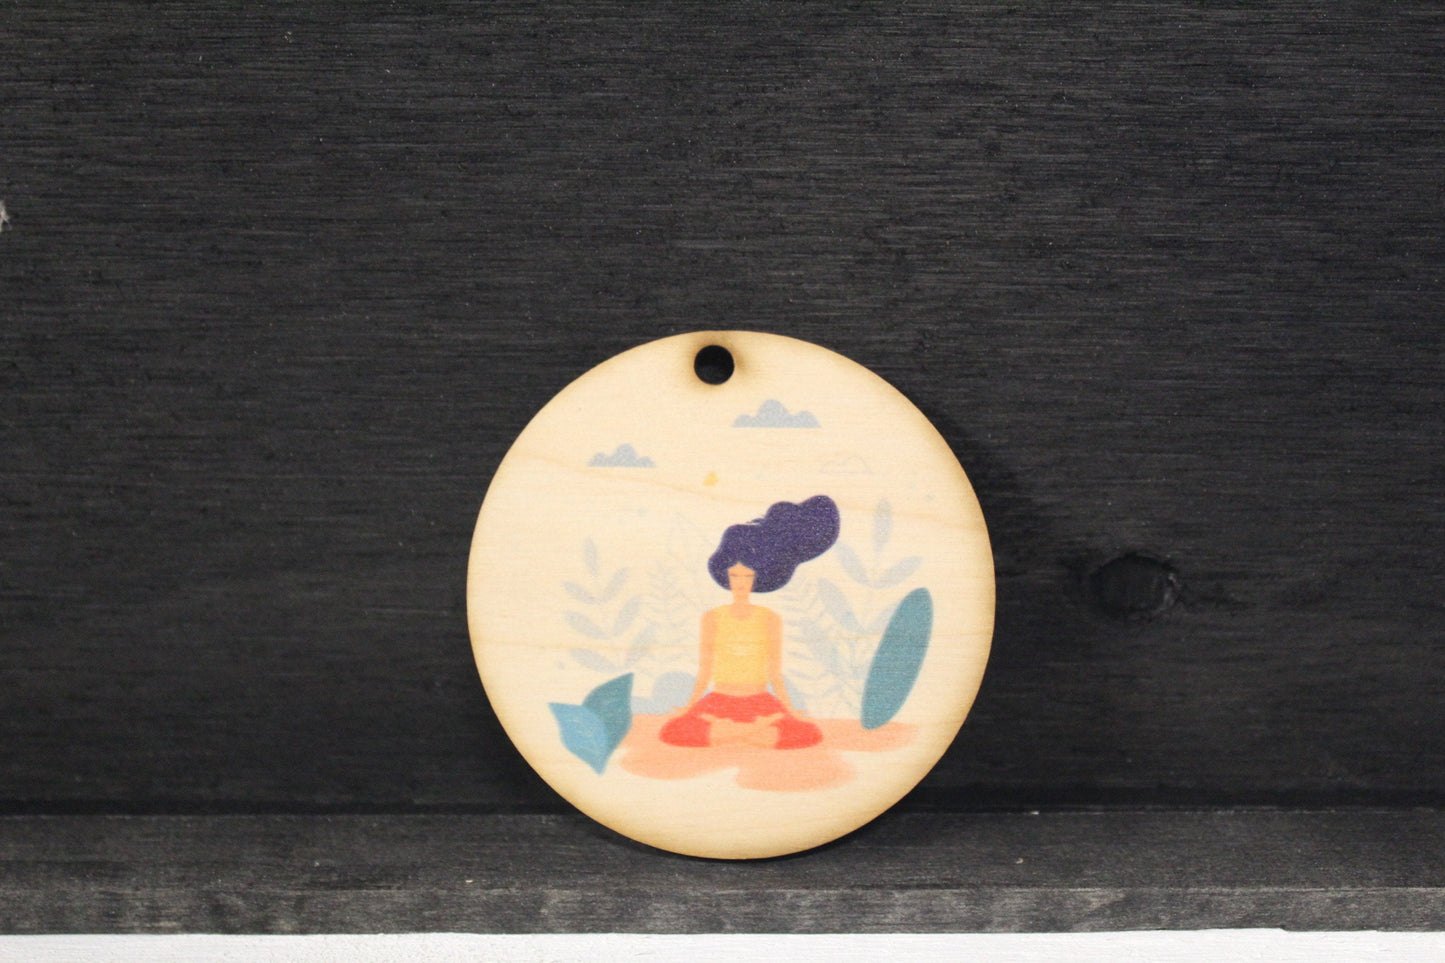 Yoga Meditate Peace Therapy Exercise Tranquility Minimalist Ornament Christmas Holiday Special Keychain Gift Gift tag Woodslice Circle